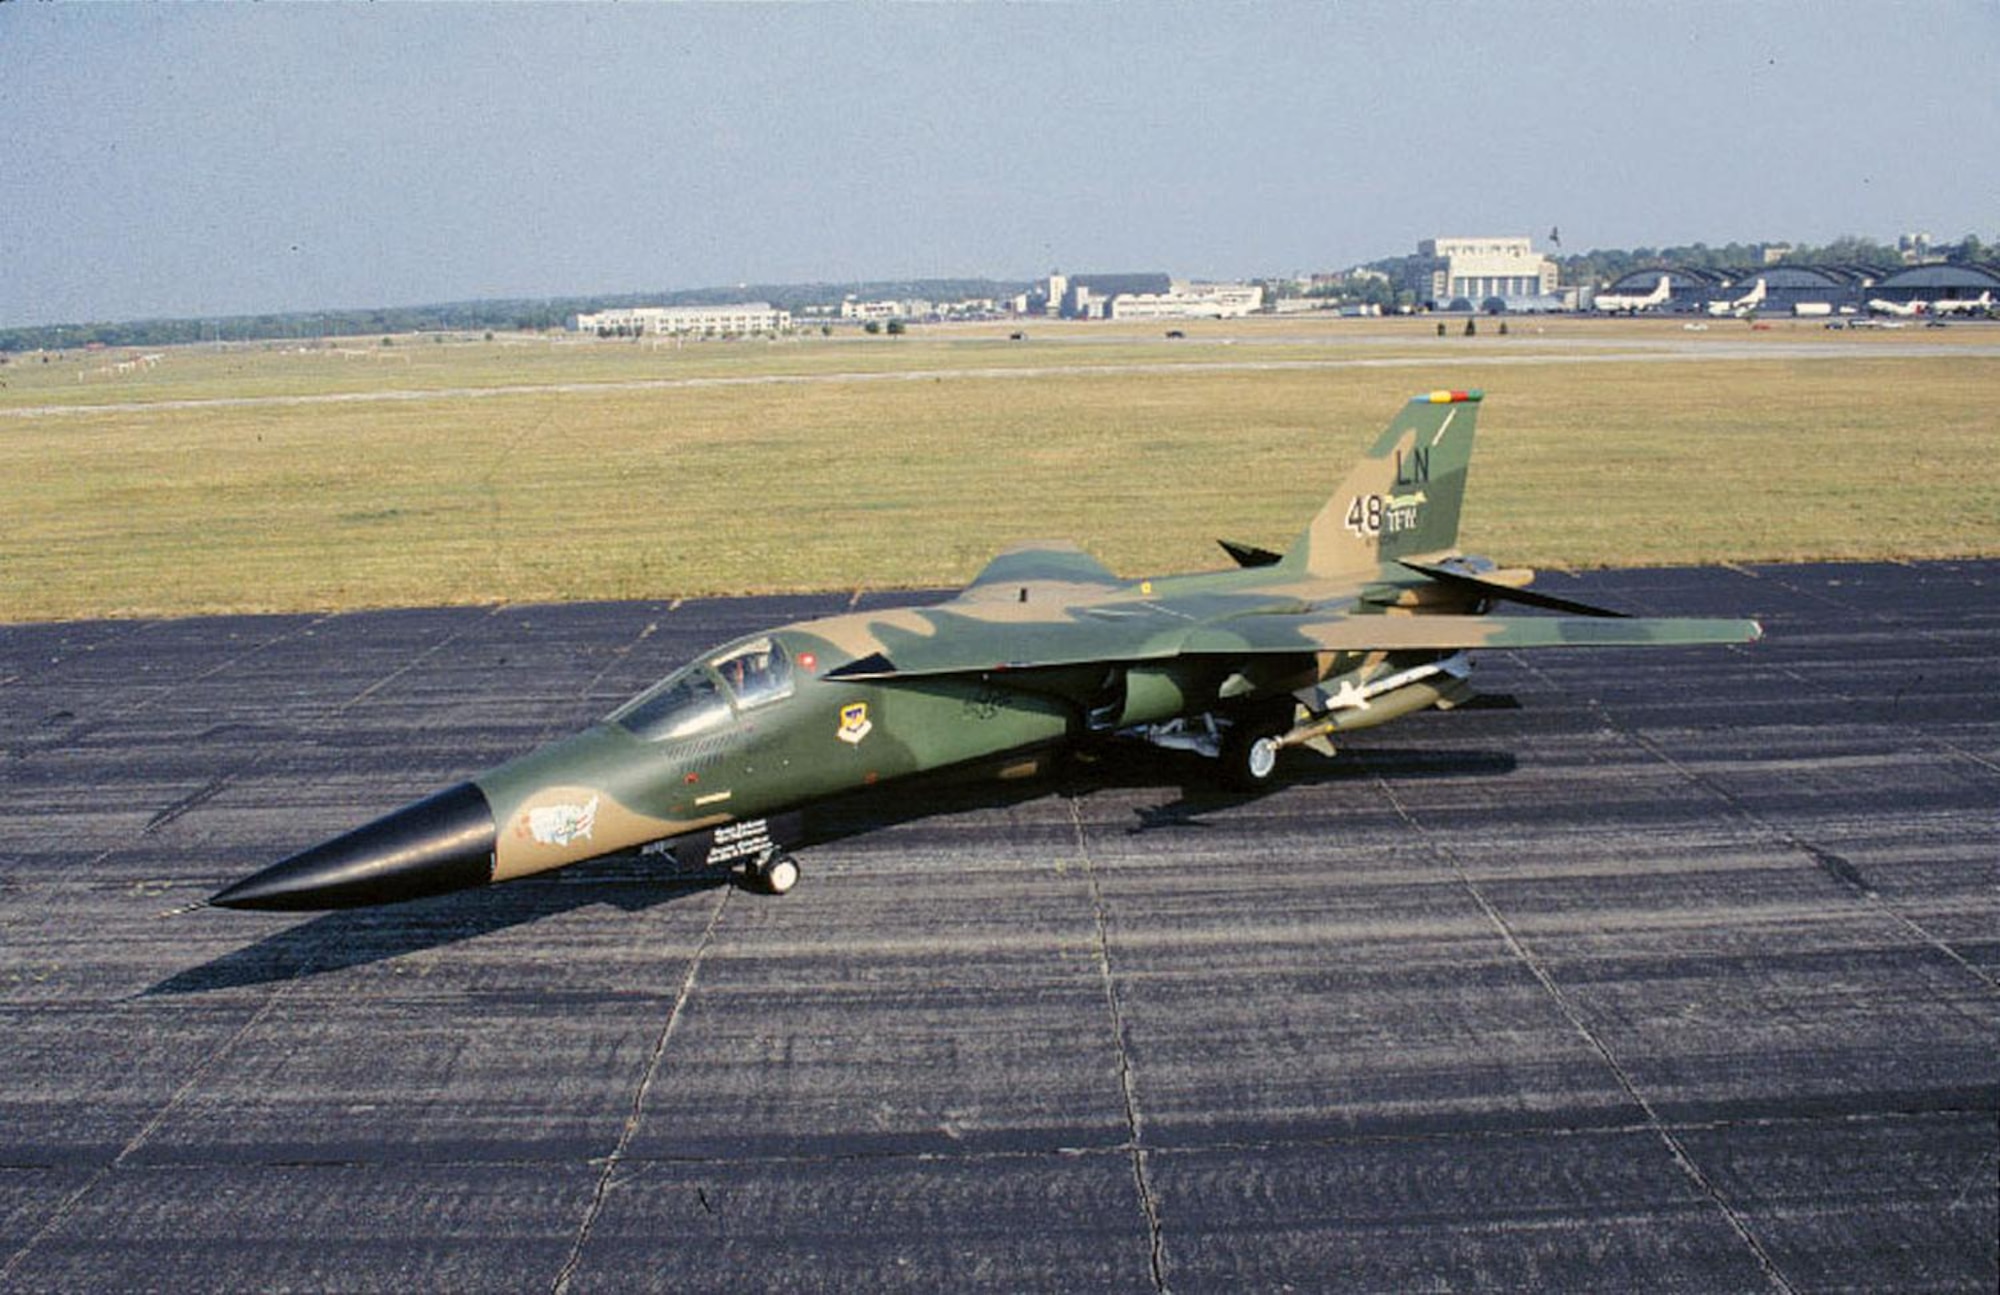 DAYTON, Ohio -- General Dynamics F-111F at the National Museum of the United States Air Force. (U.S. Air Force photo)